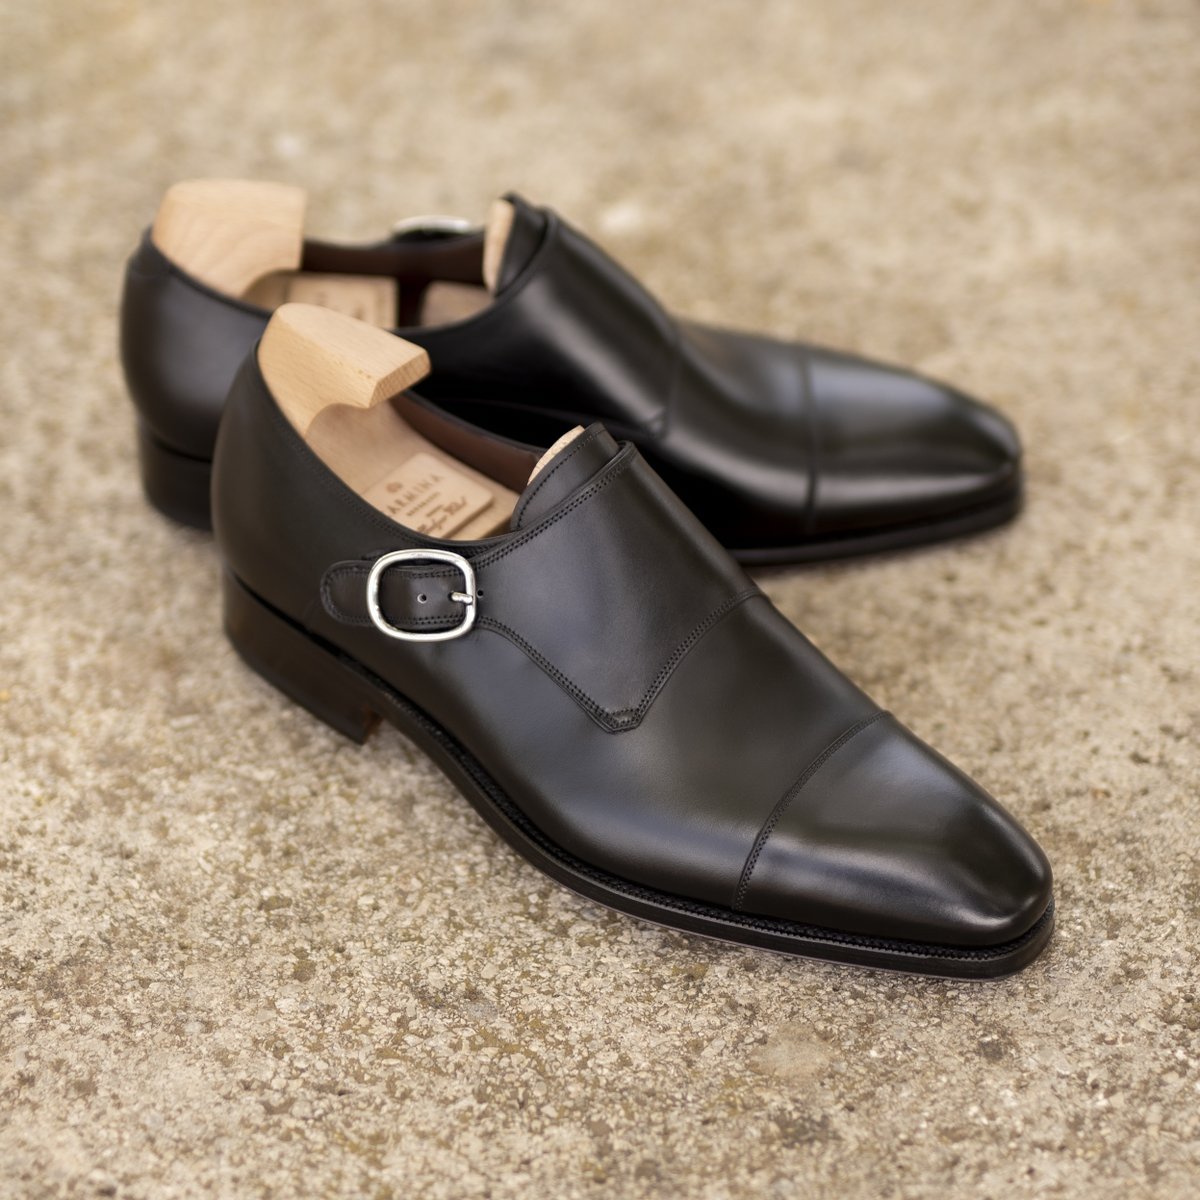 Winter Sale 2024
Explore winter elegance with our Winter Sale. Enjoy a 25% discount on the refined Monk Strap 80093 shoes and more. Elevate your style with the distinctive touch of Carmina.
#carminashoemaker #カルミナ #monkstrap #wintersale #shoeslover #shoes